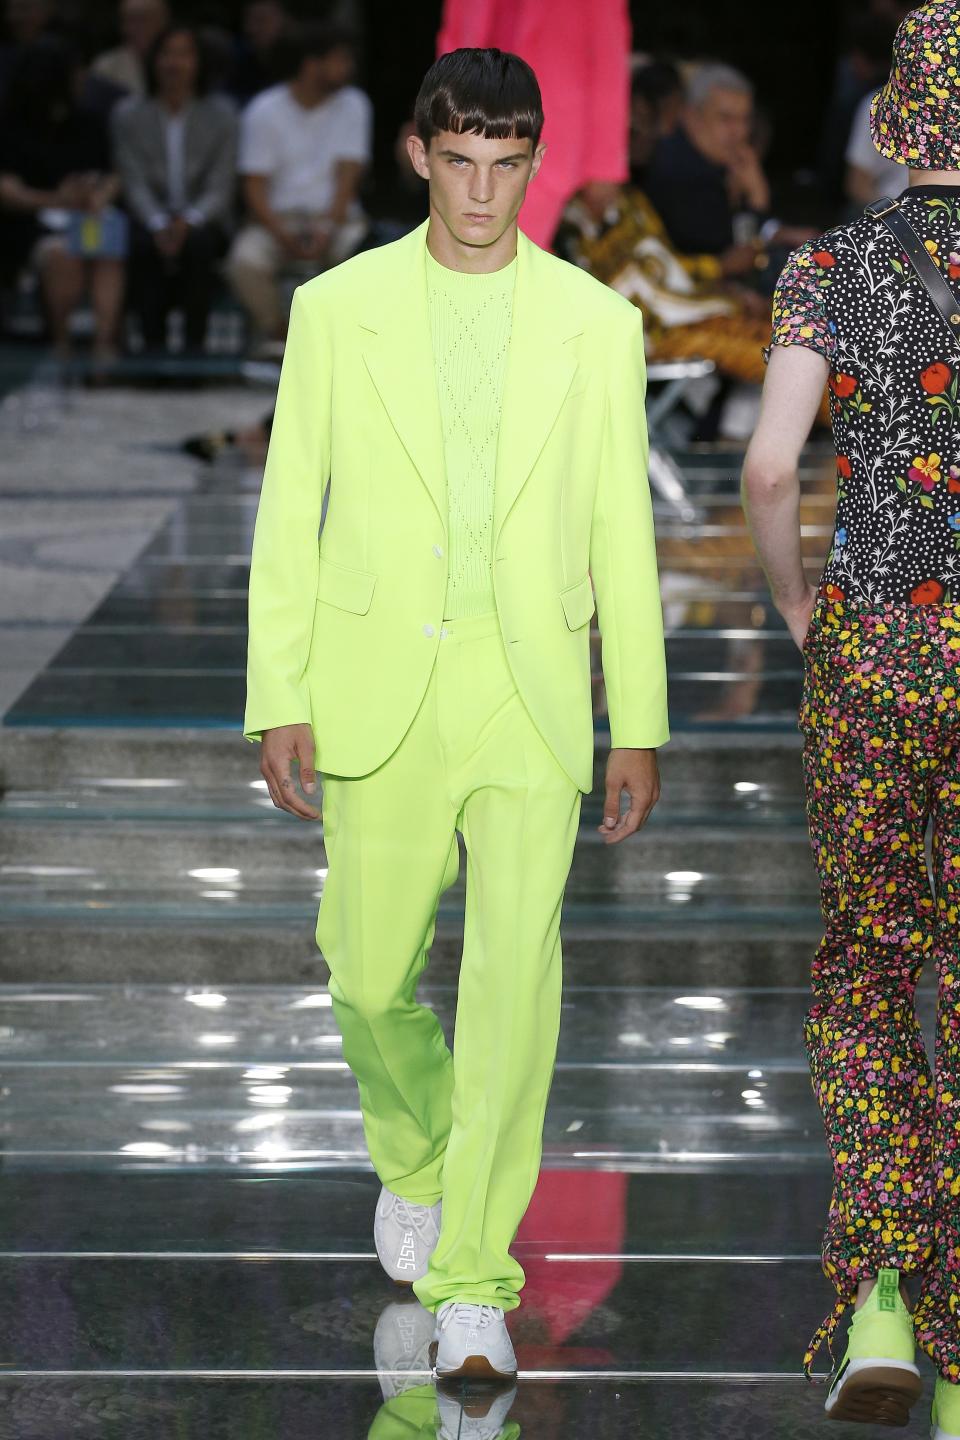 Blake Lively stepped out wearing a monochromatic neon-green suit from the SS'19 Versace menswear collection.